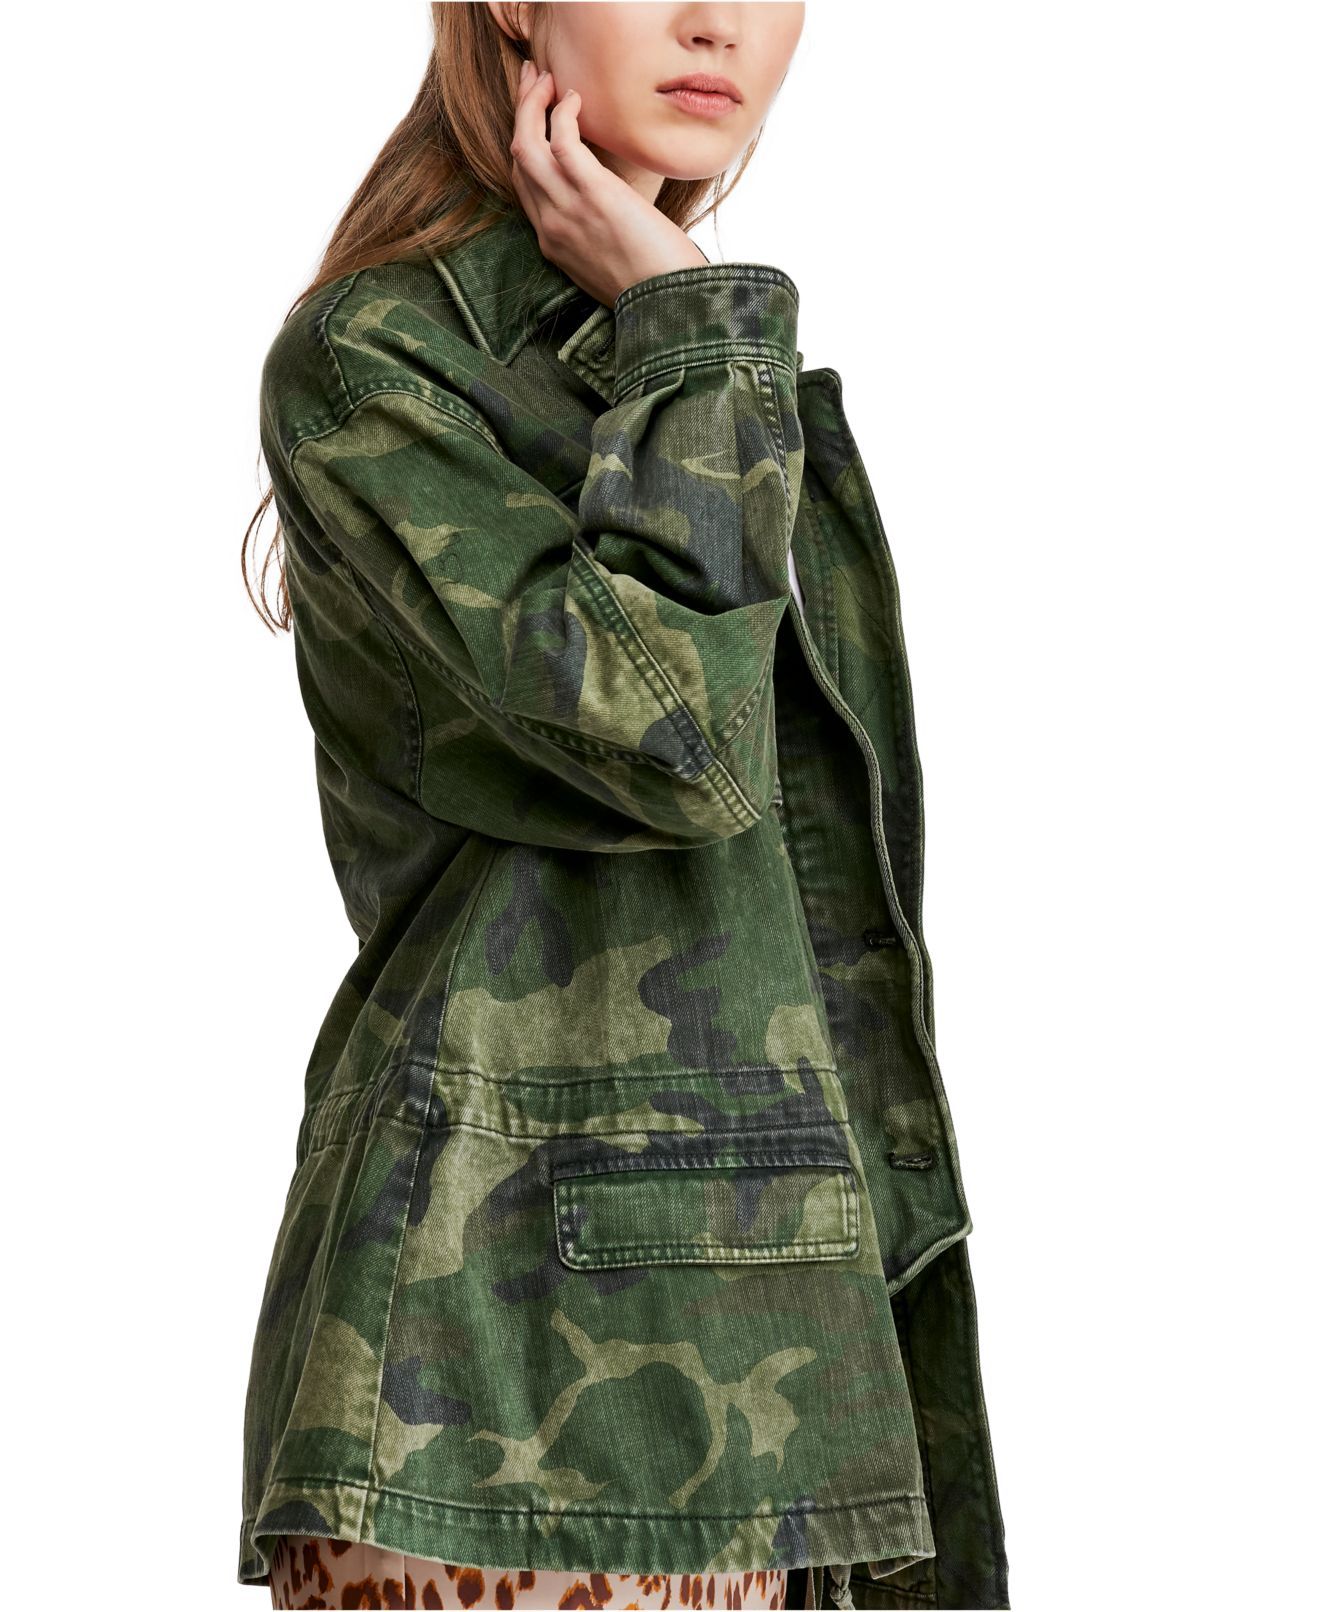 Color: Greens Size Type: Regular Size (Women's): S Type: Jacket Style: Basic Coat Outer Shell Material: 100% Cotton